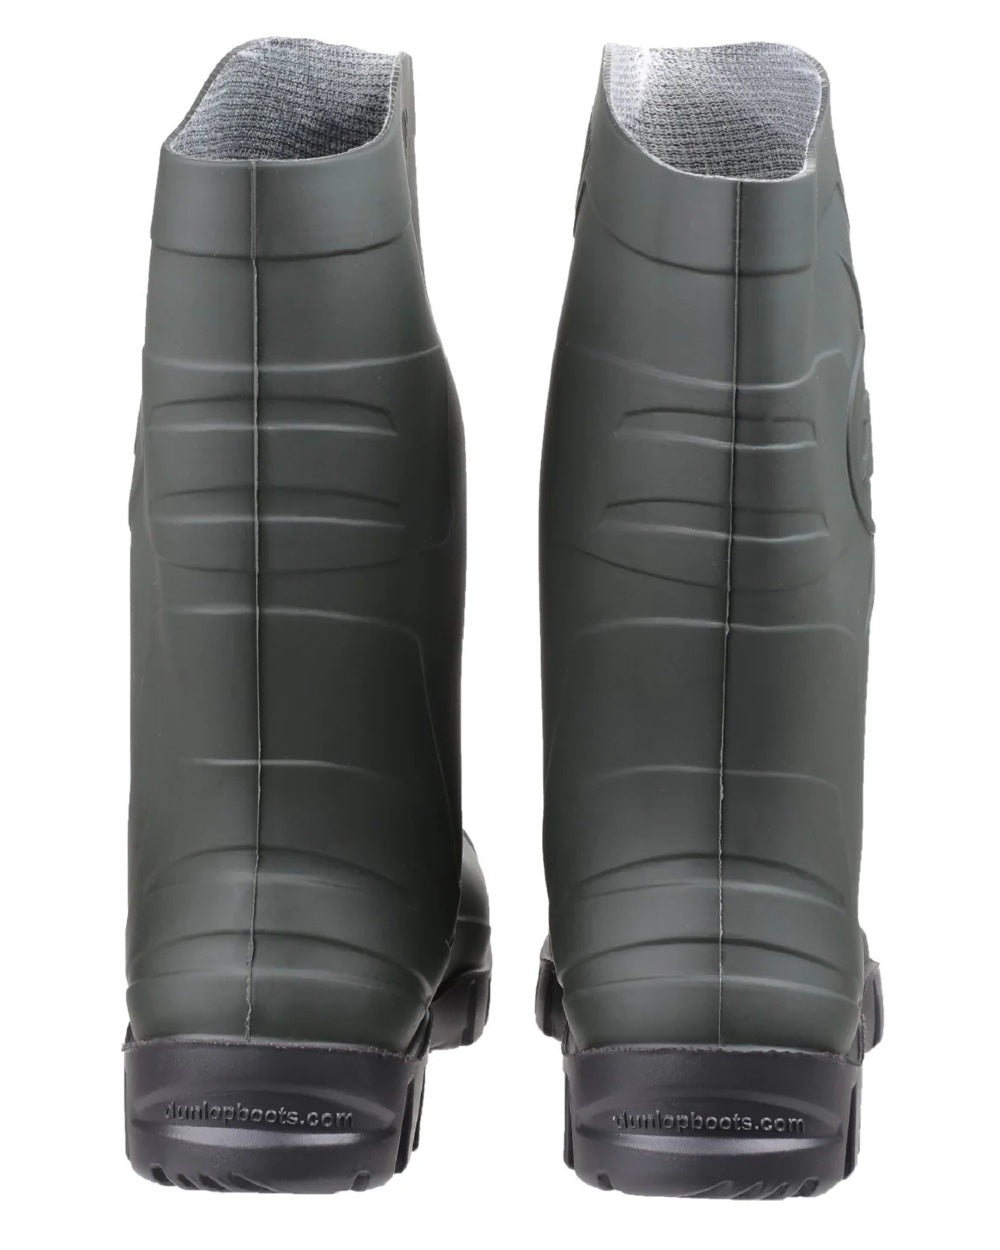 Green coloured Dunlop Dee Calf Length Wellingtons on white background 